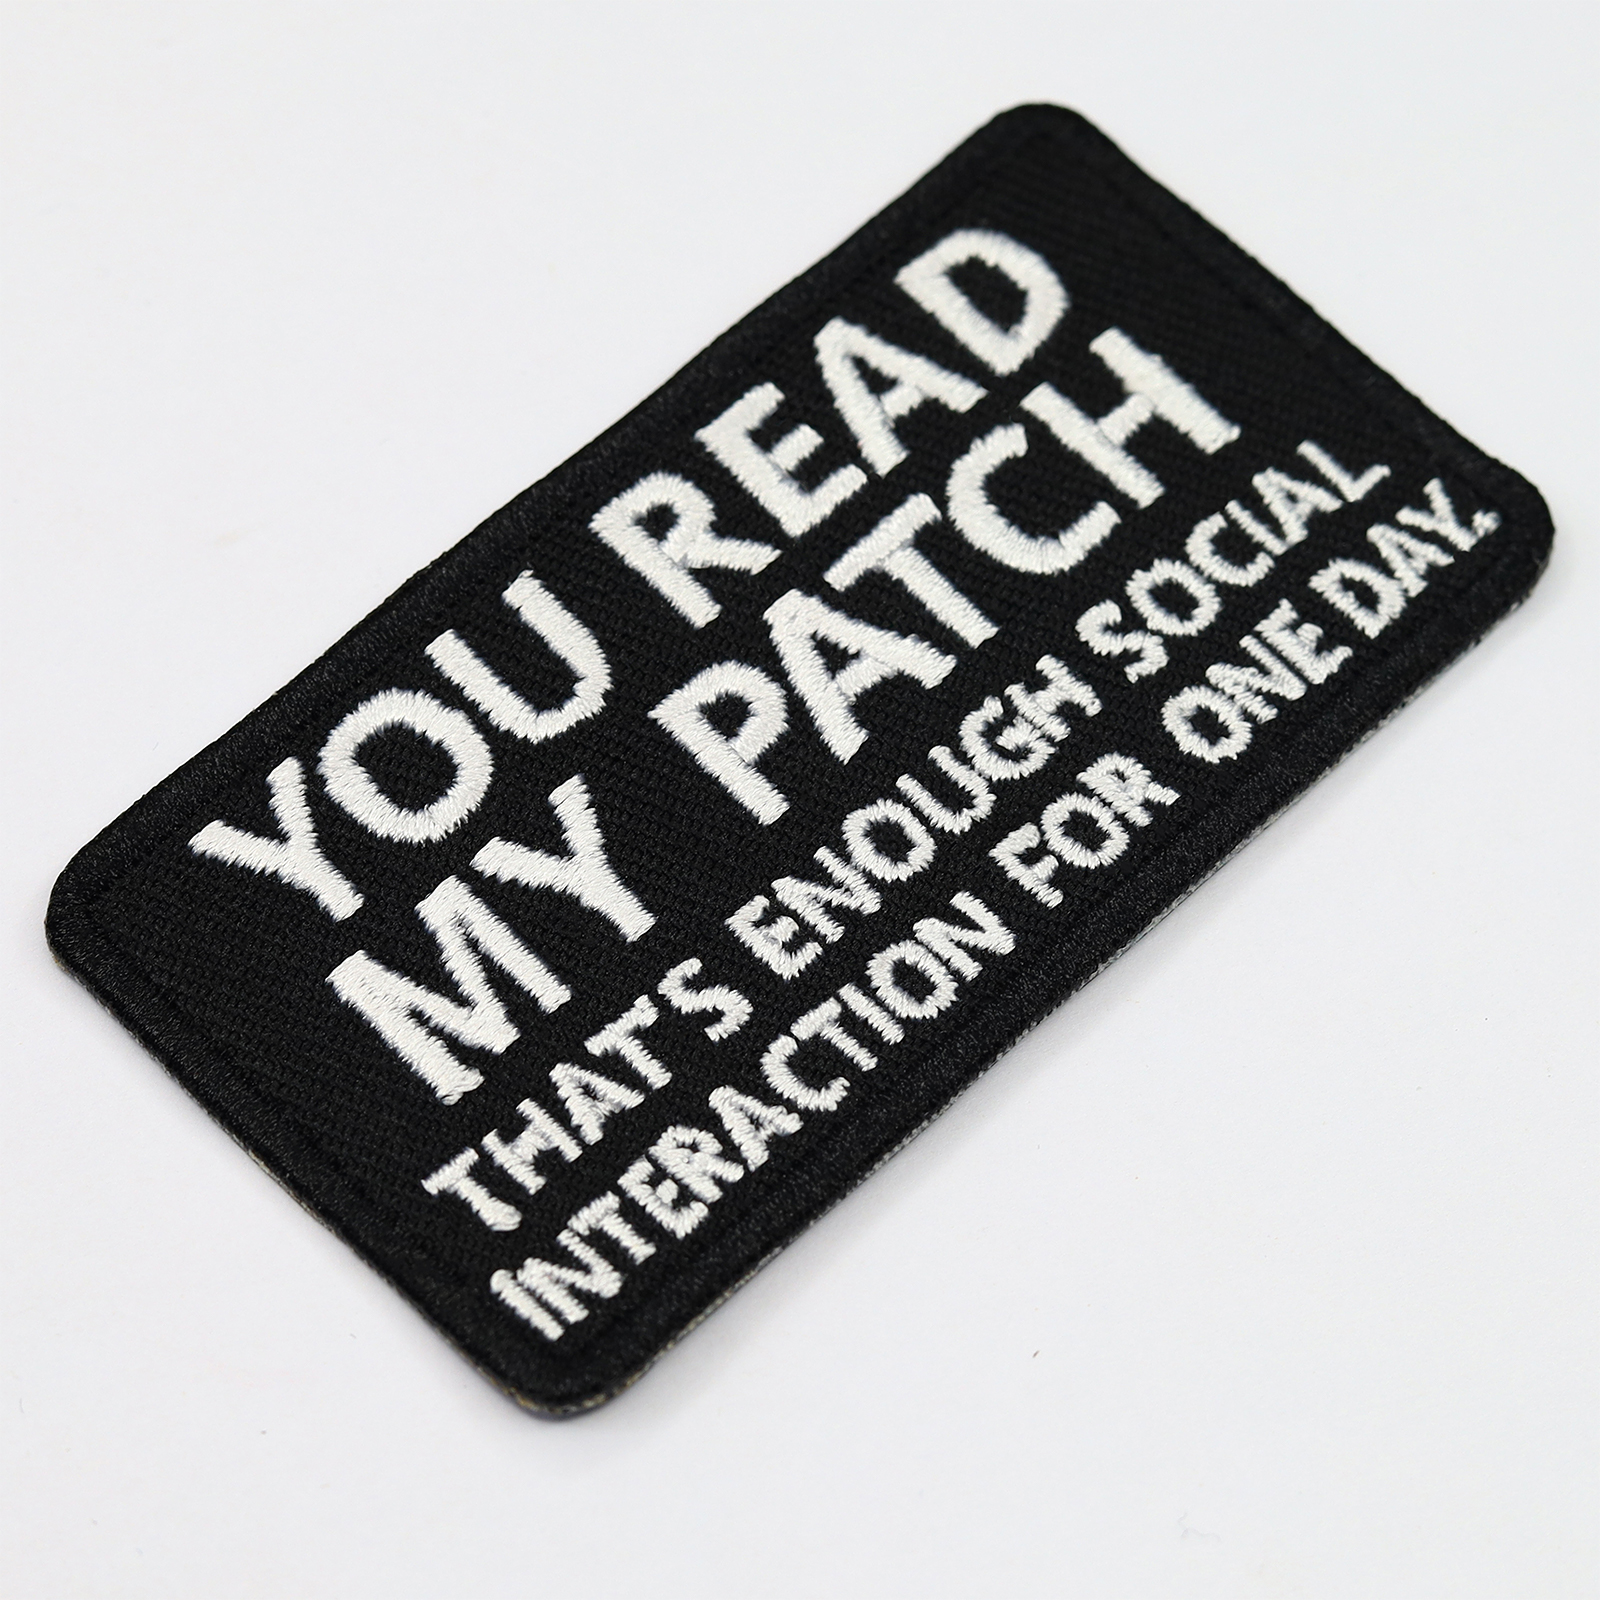 You read my patch - That's enough social interaction for one day. - Patch